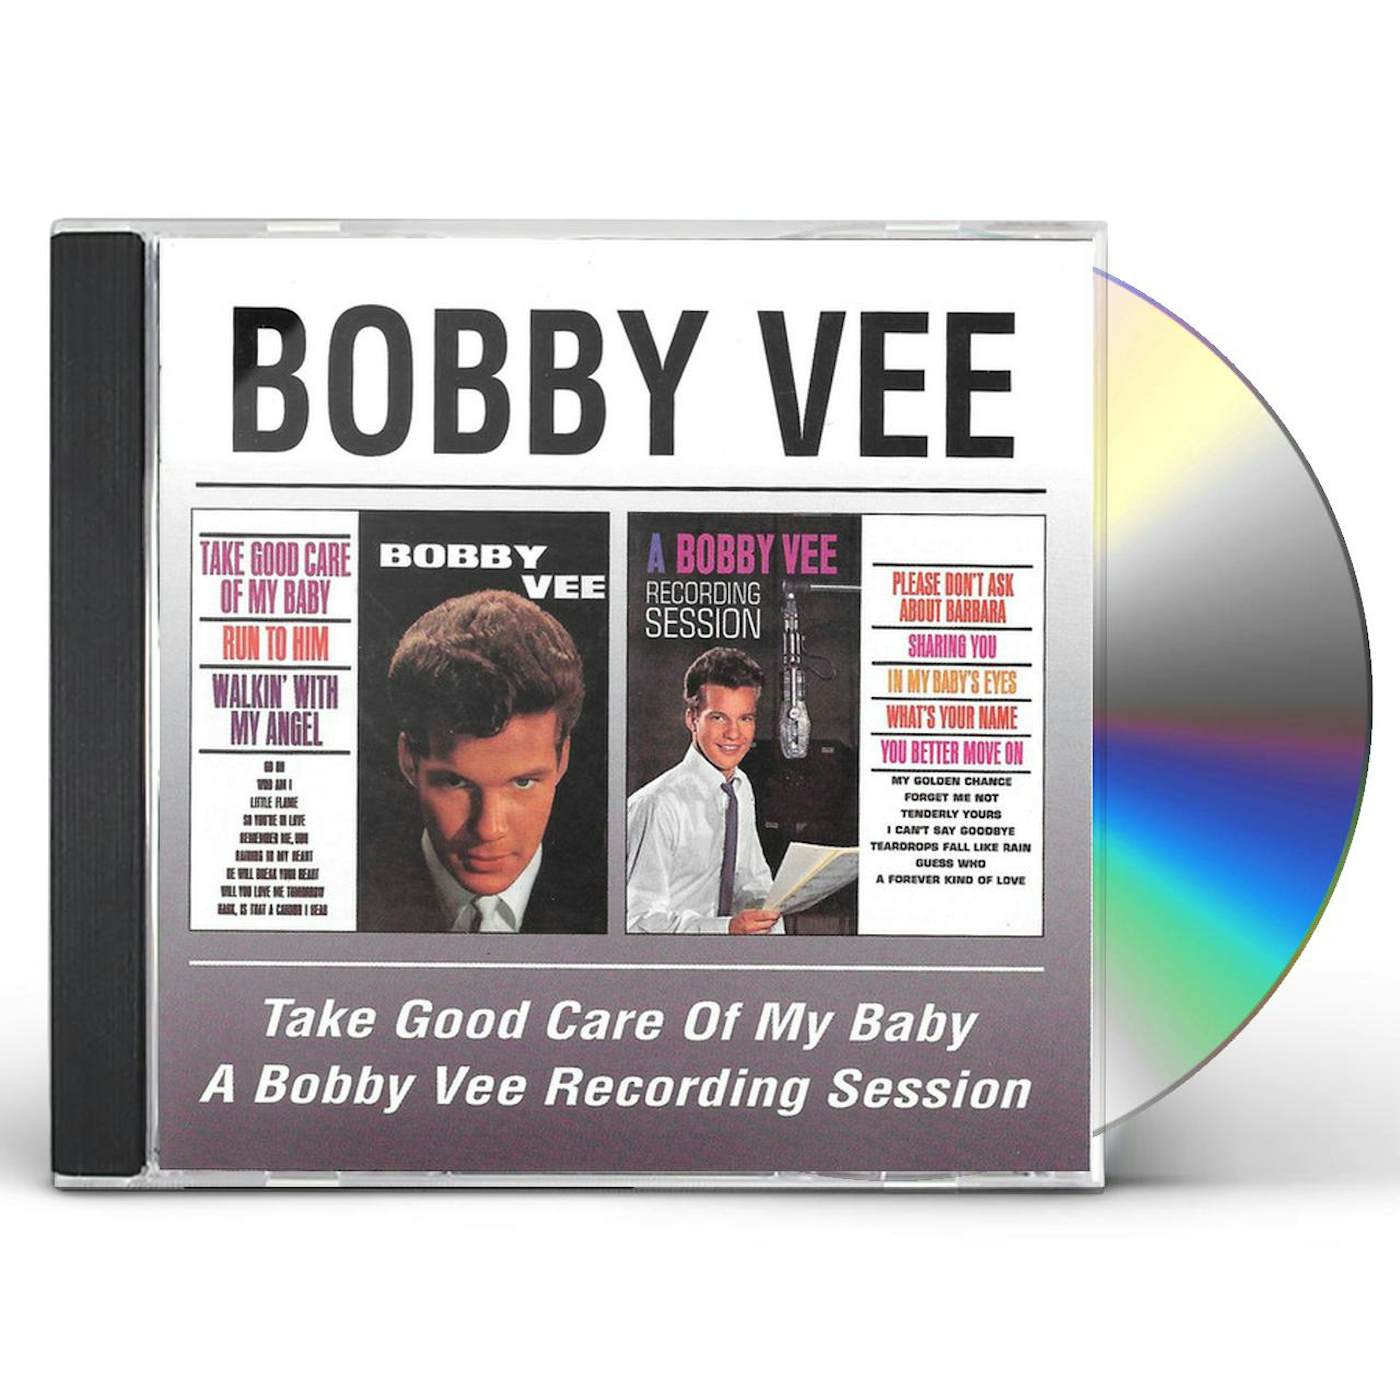 Bobby Vee TAKE GOOD CARE OF MY BABY / RECORDING SESSION CD